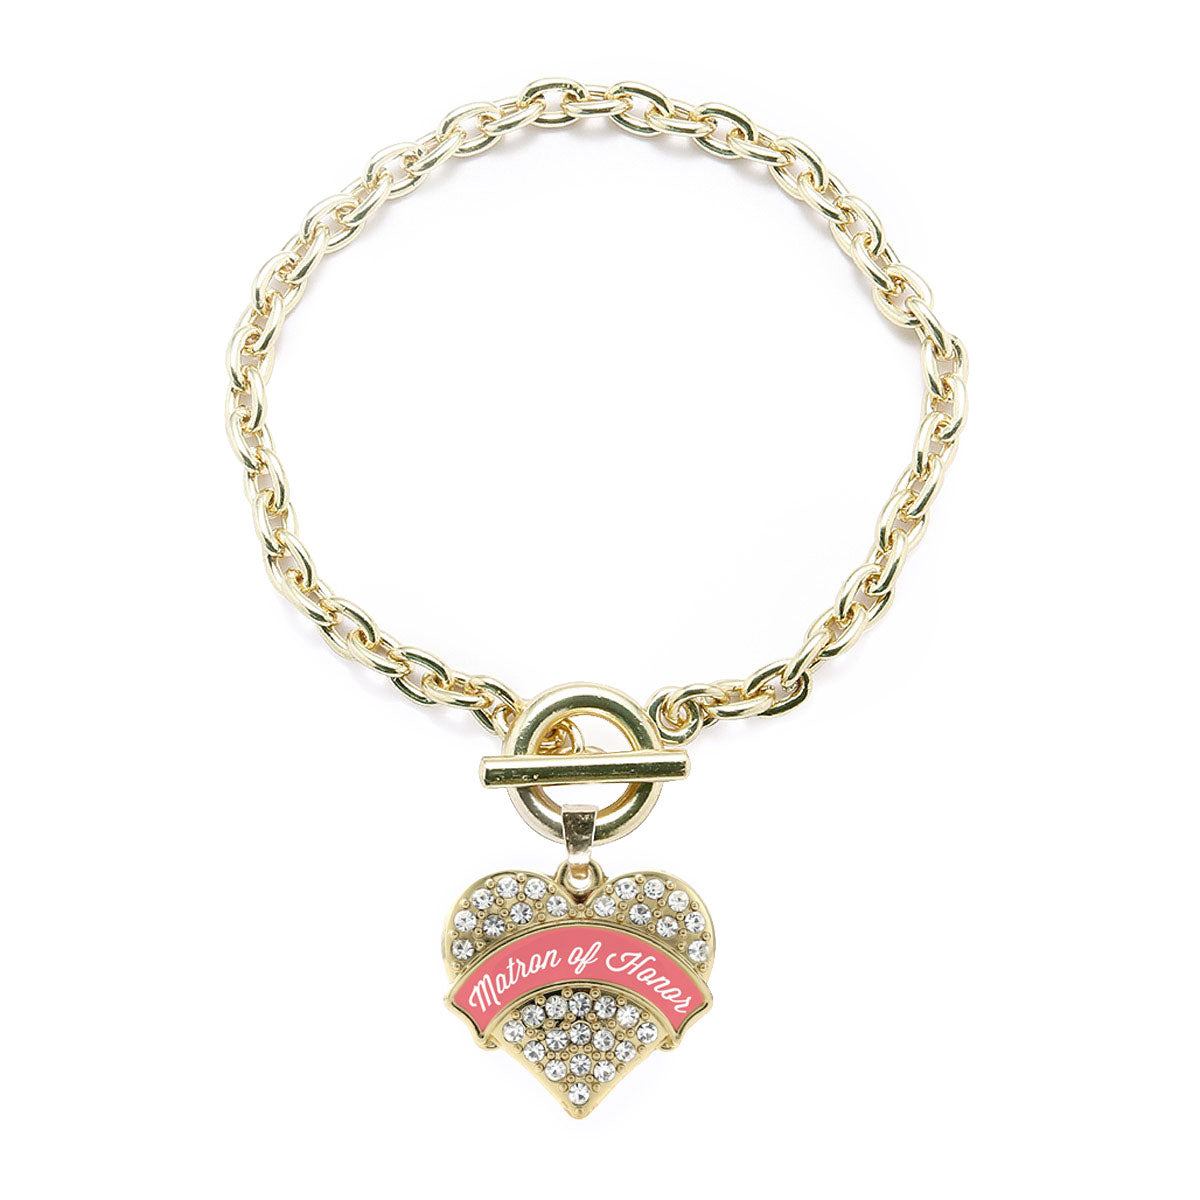 Gold Coral Matron of Honor Pave Heart Charm Toggle Bracelet